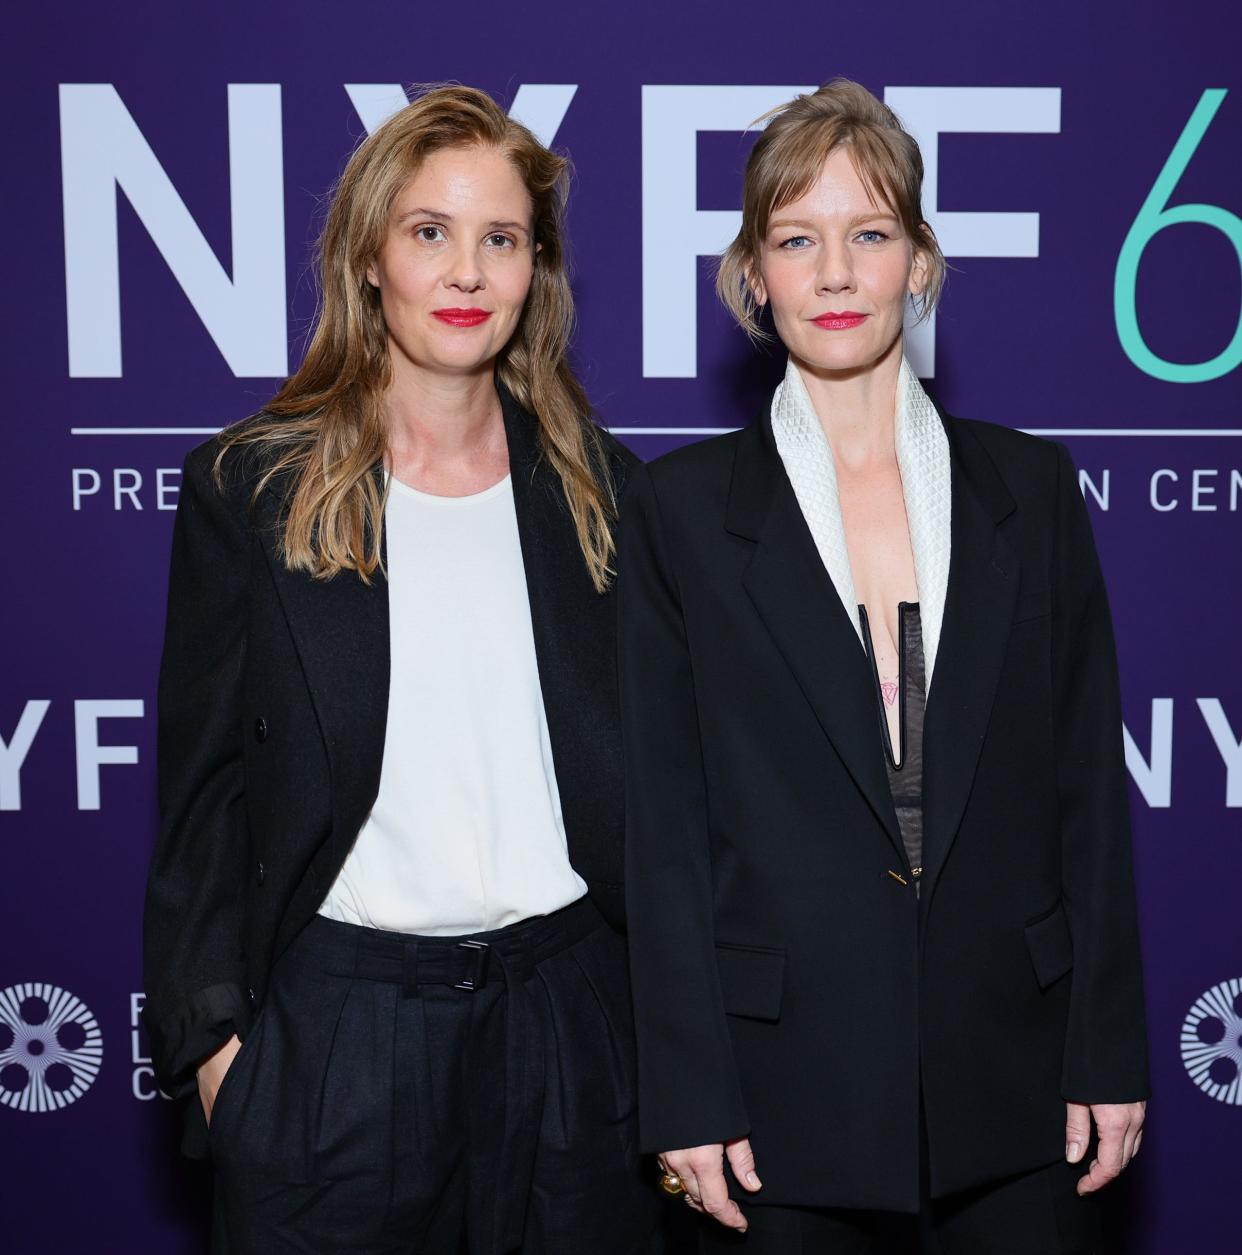 Justine Triet, left, and Sandra Hüller at the New York Film Festival premiere of "Anatomy of a Fall" earlier this month.